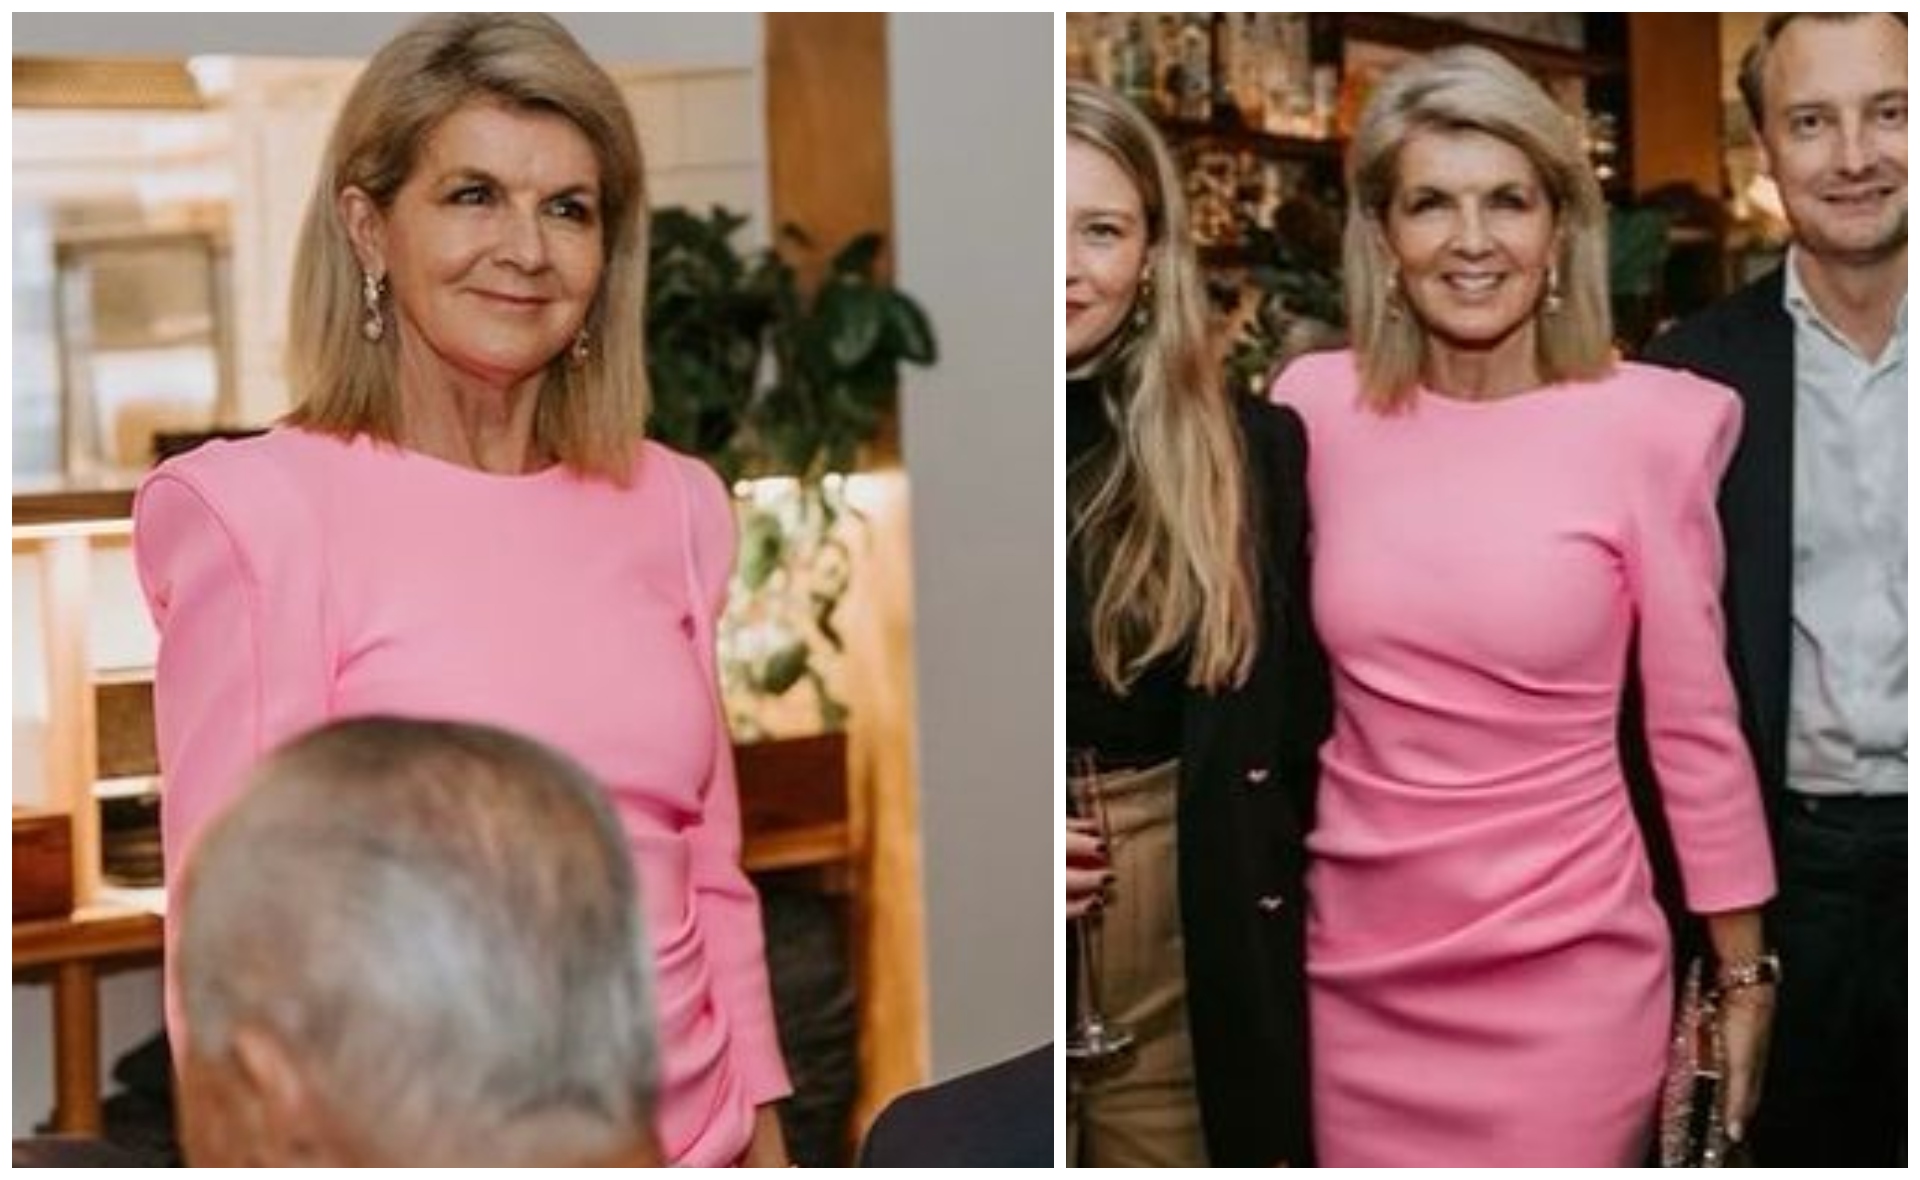 Julie Bishop’s night out in Manly involved a bright pink dress and a couple of celebrity run-ins